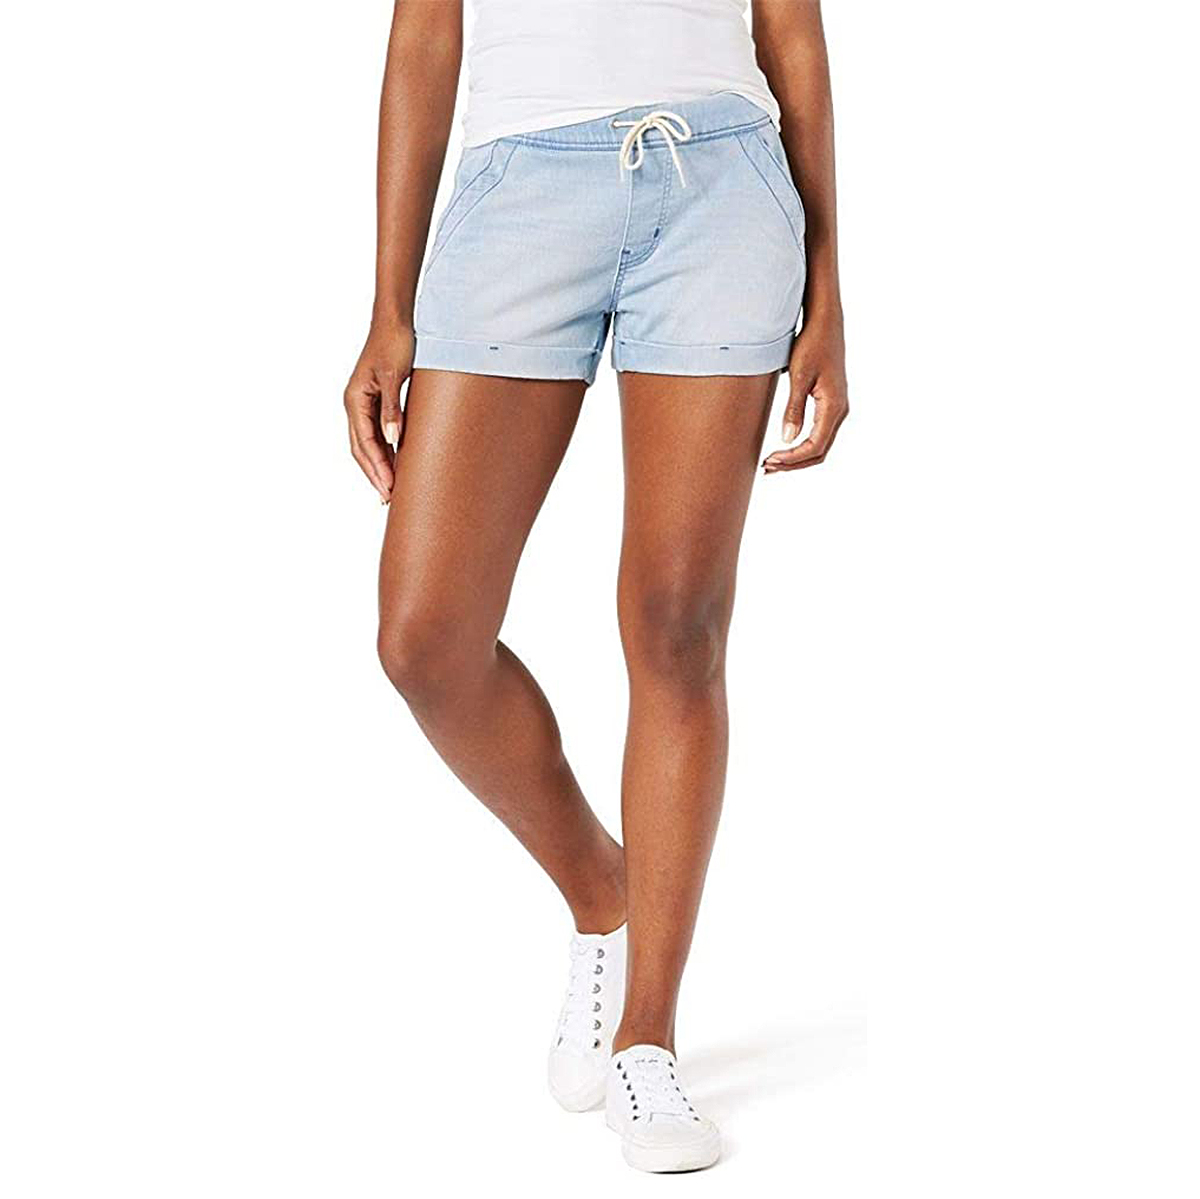 Signature by Levi Strauss & Co. Gold Label Women's Mid-Rise Pull-On Shorts